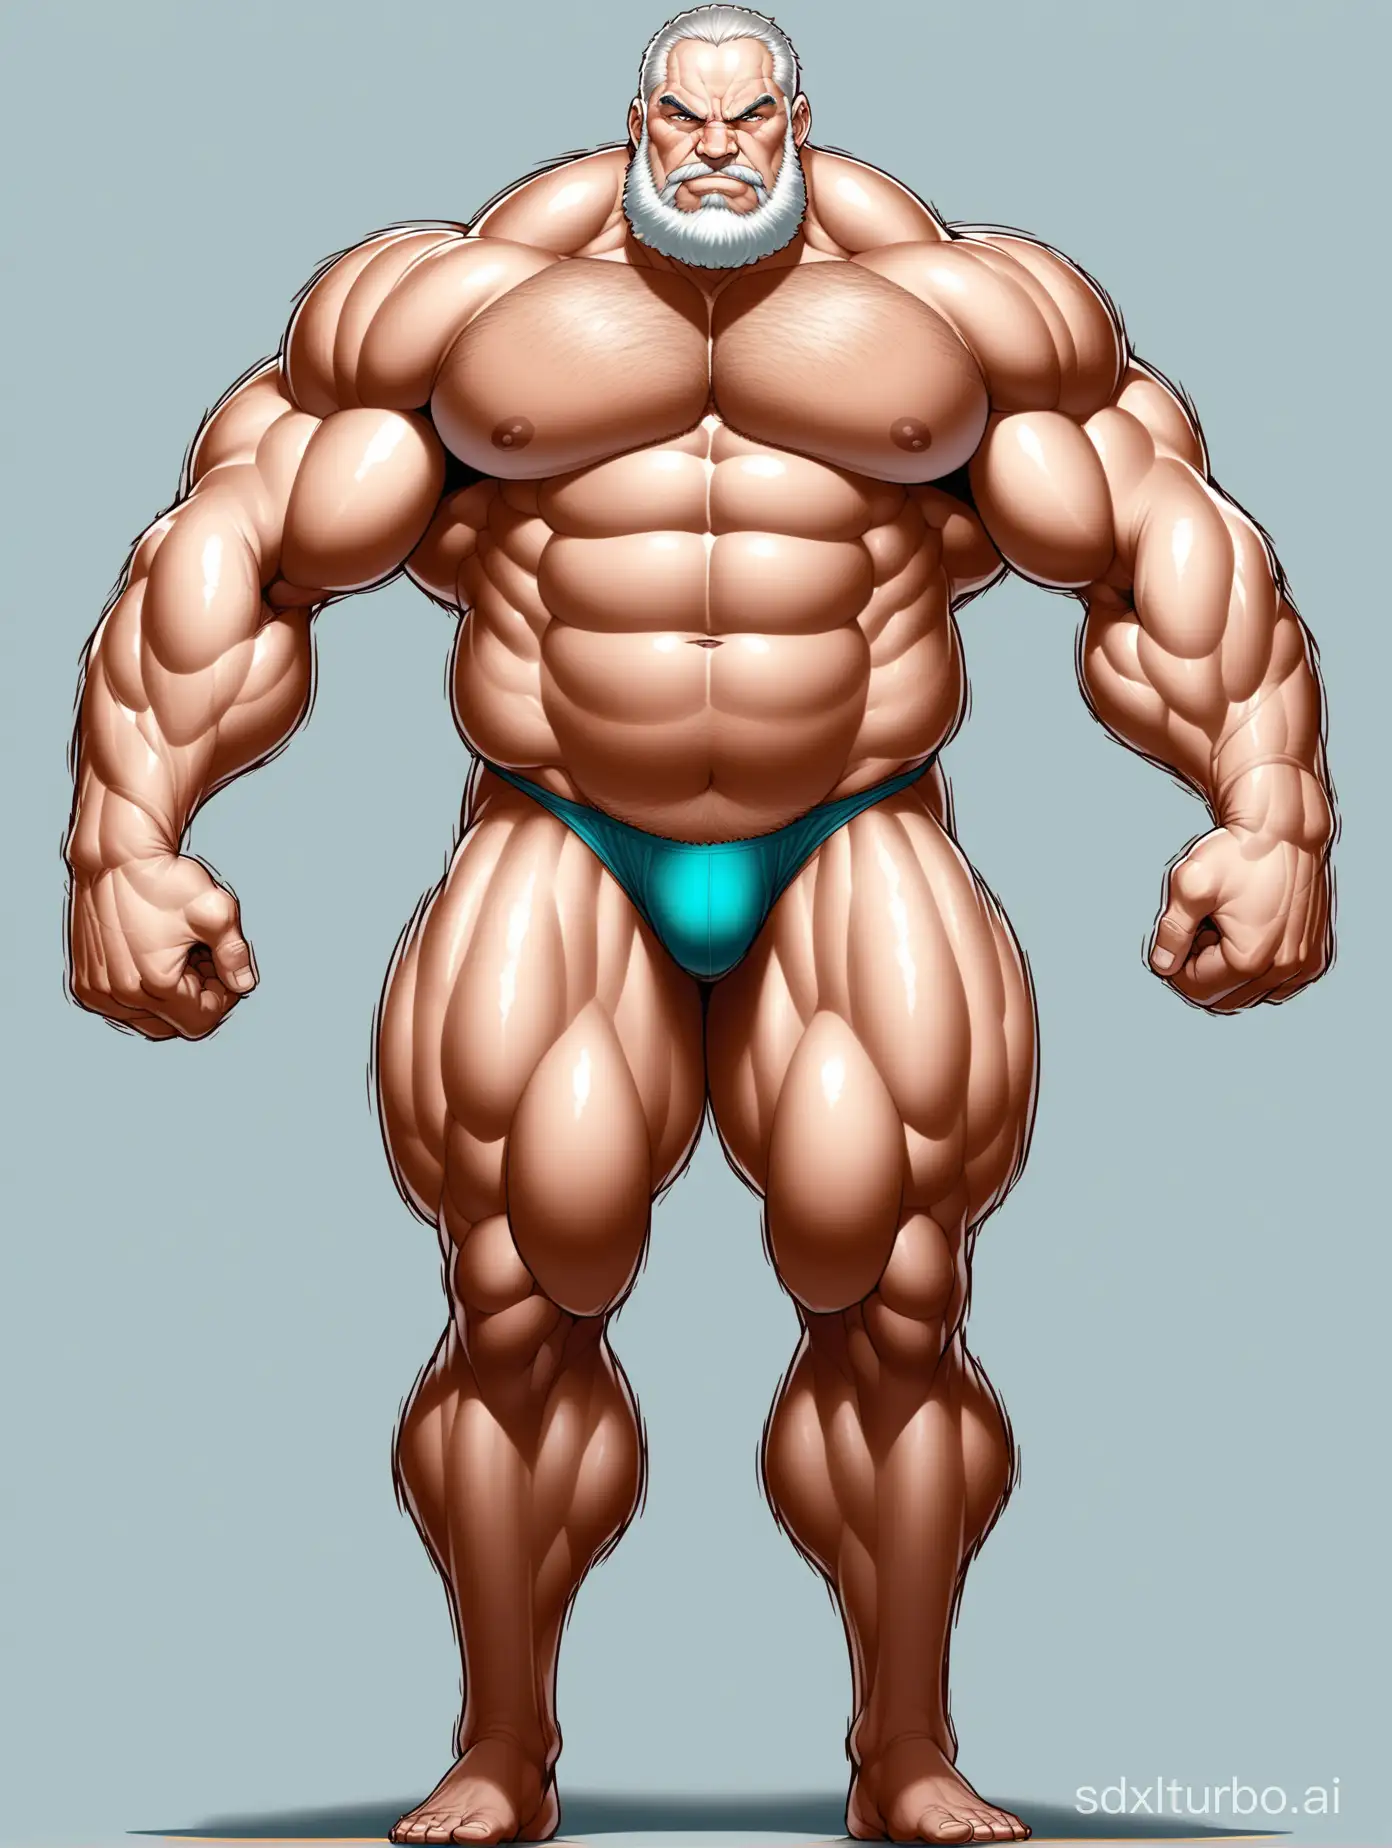 White skin and massive muscle stud, much bodyhair. Huge and giant and Strong body. Very Long and strong legs. 2m tall. very Big Chest. very Big biceps. 8-pack abs. Very Massive muscle Body. Wearing underwear. he is giant tall. very fat. very fat. very fat. Full Body diagram. very long strong legs.very long legs.very long legs. raise his arms to show his huge biceps. wearing white shoes. raise his arms to show his huge biceps.very old man.very old men.